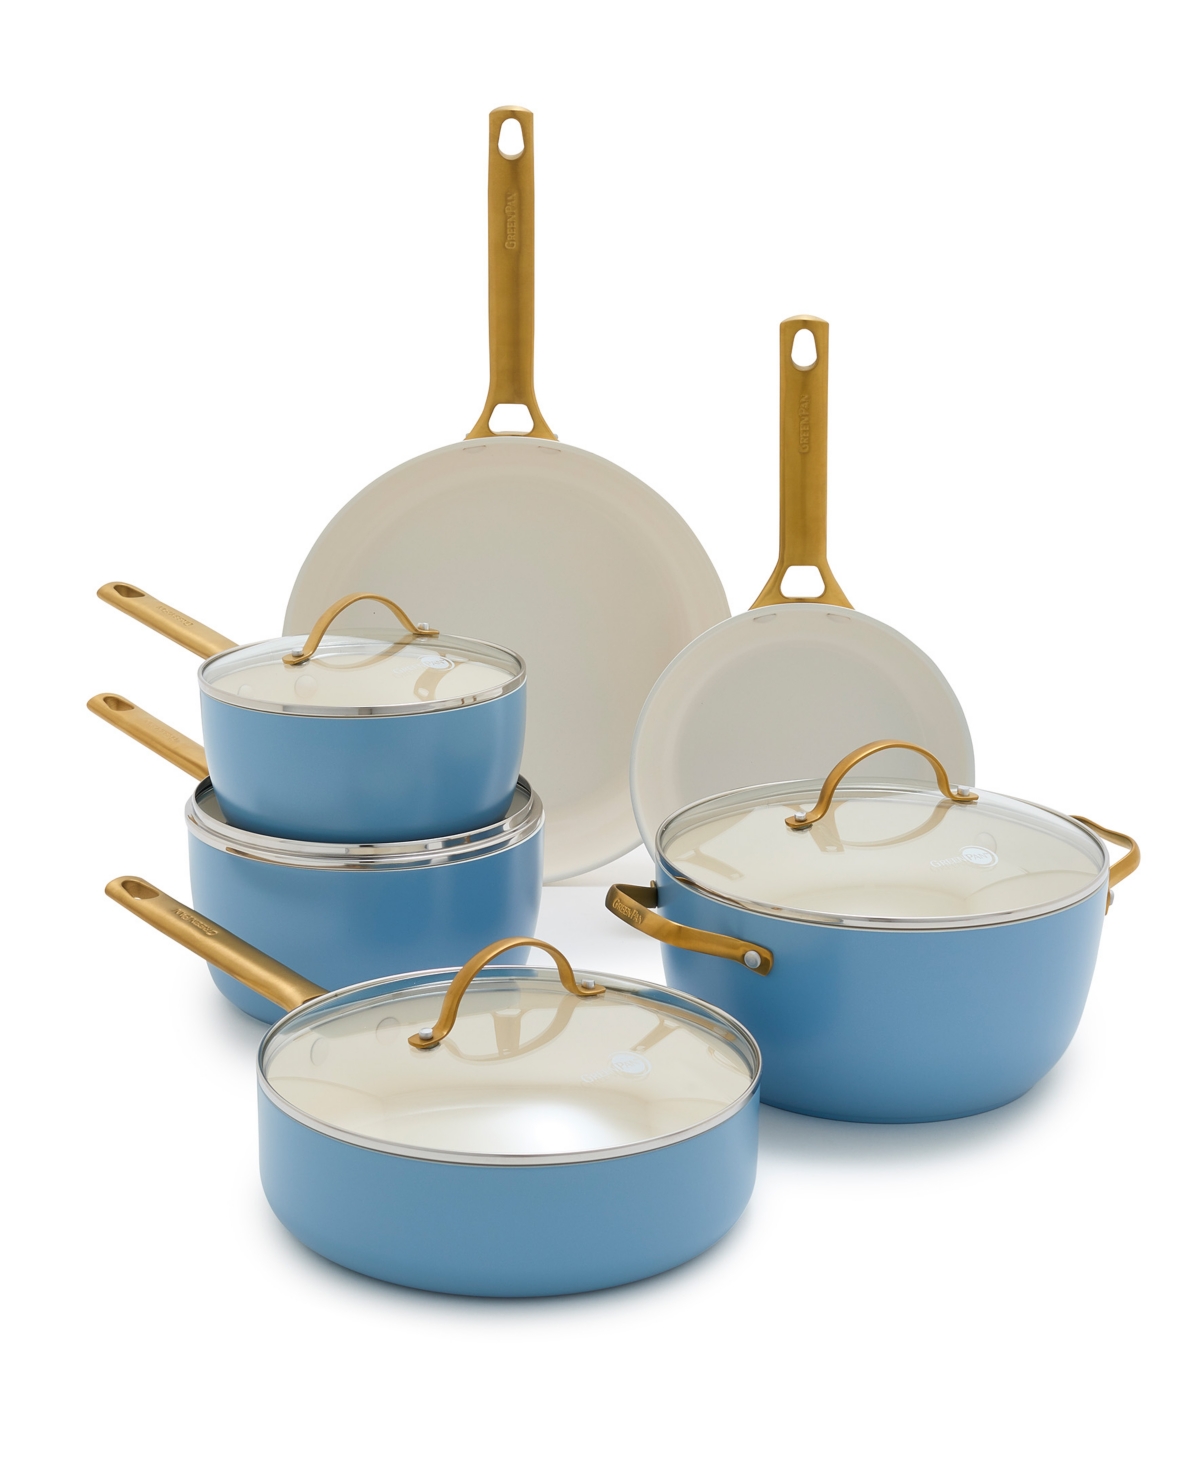 Greenpan Reserve Hard Anodized Aluminum, Stainless Steel 10 Piece Nonstick Cookware Set In Sky Blue